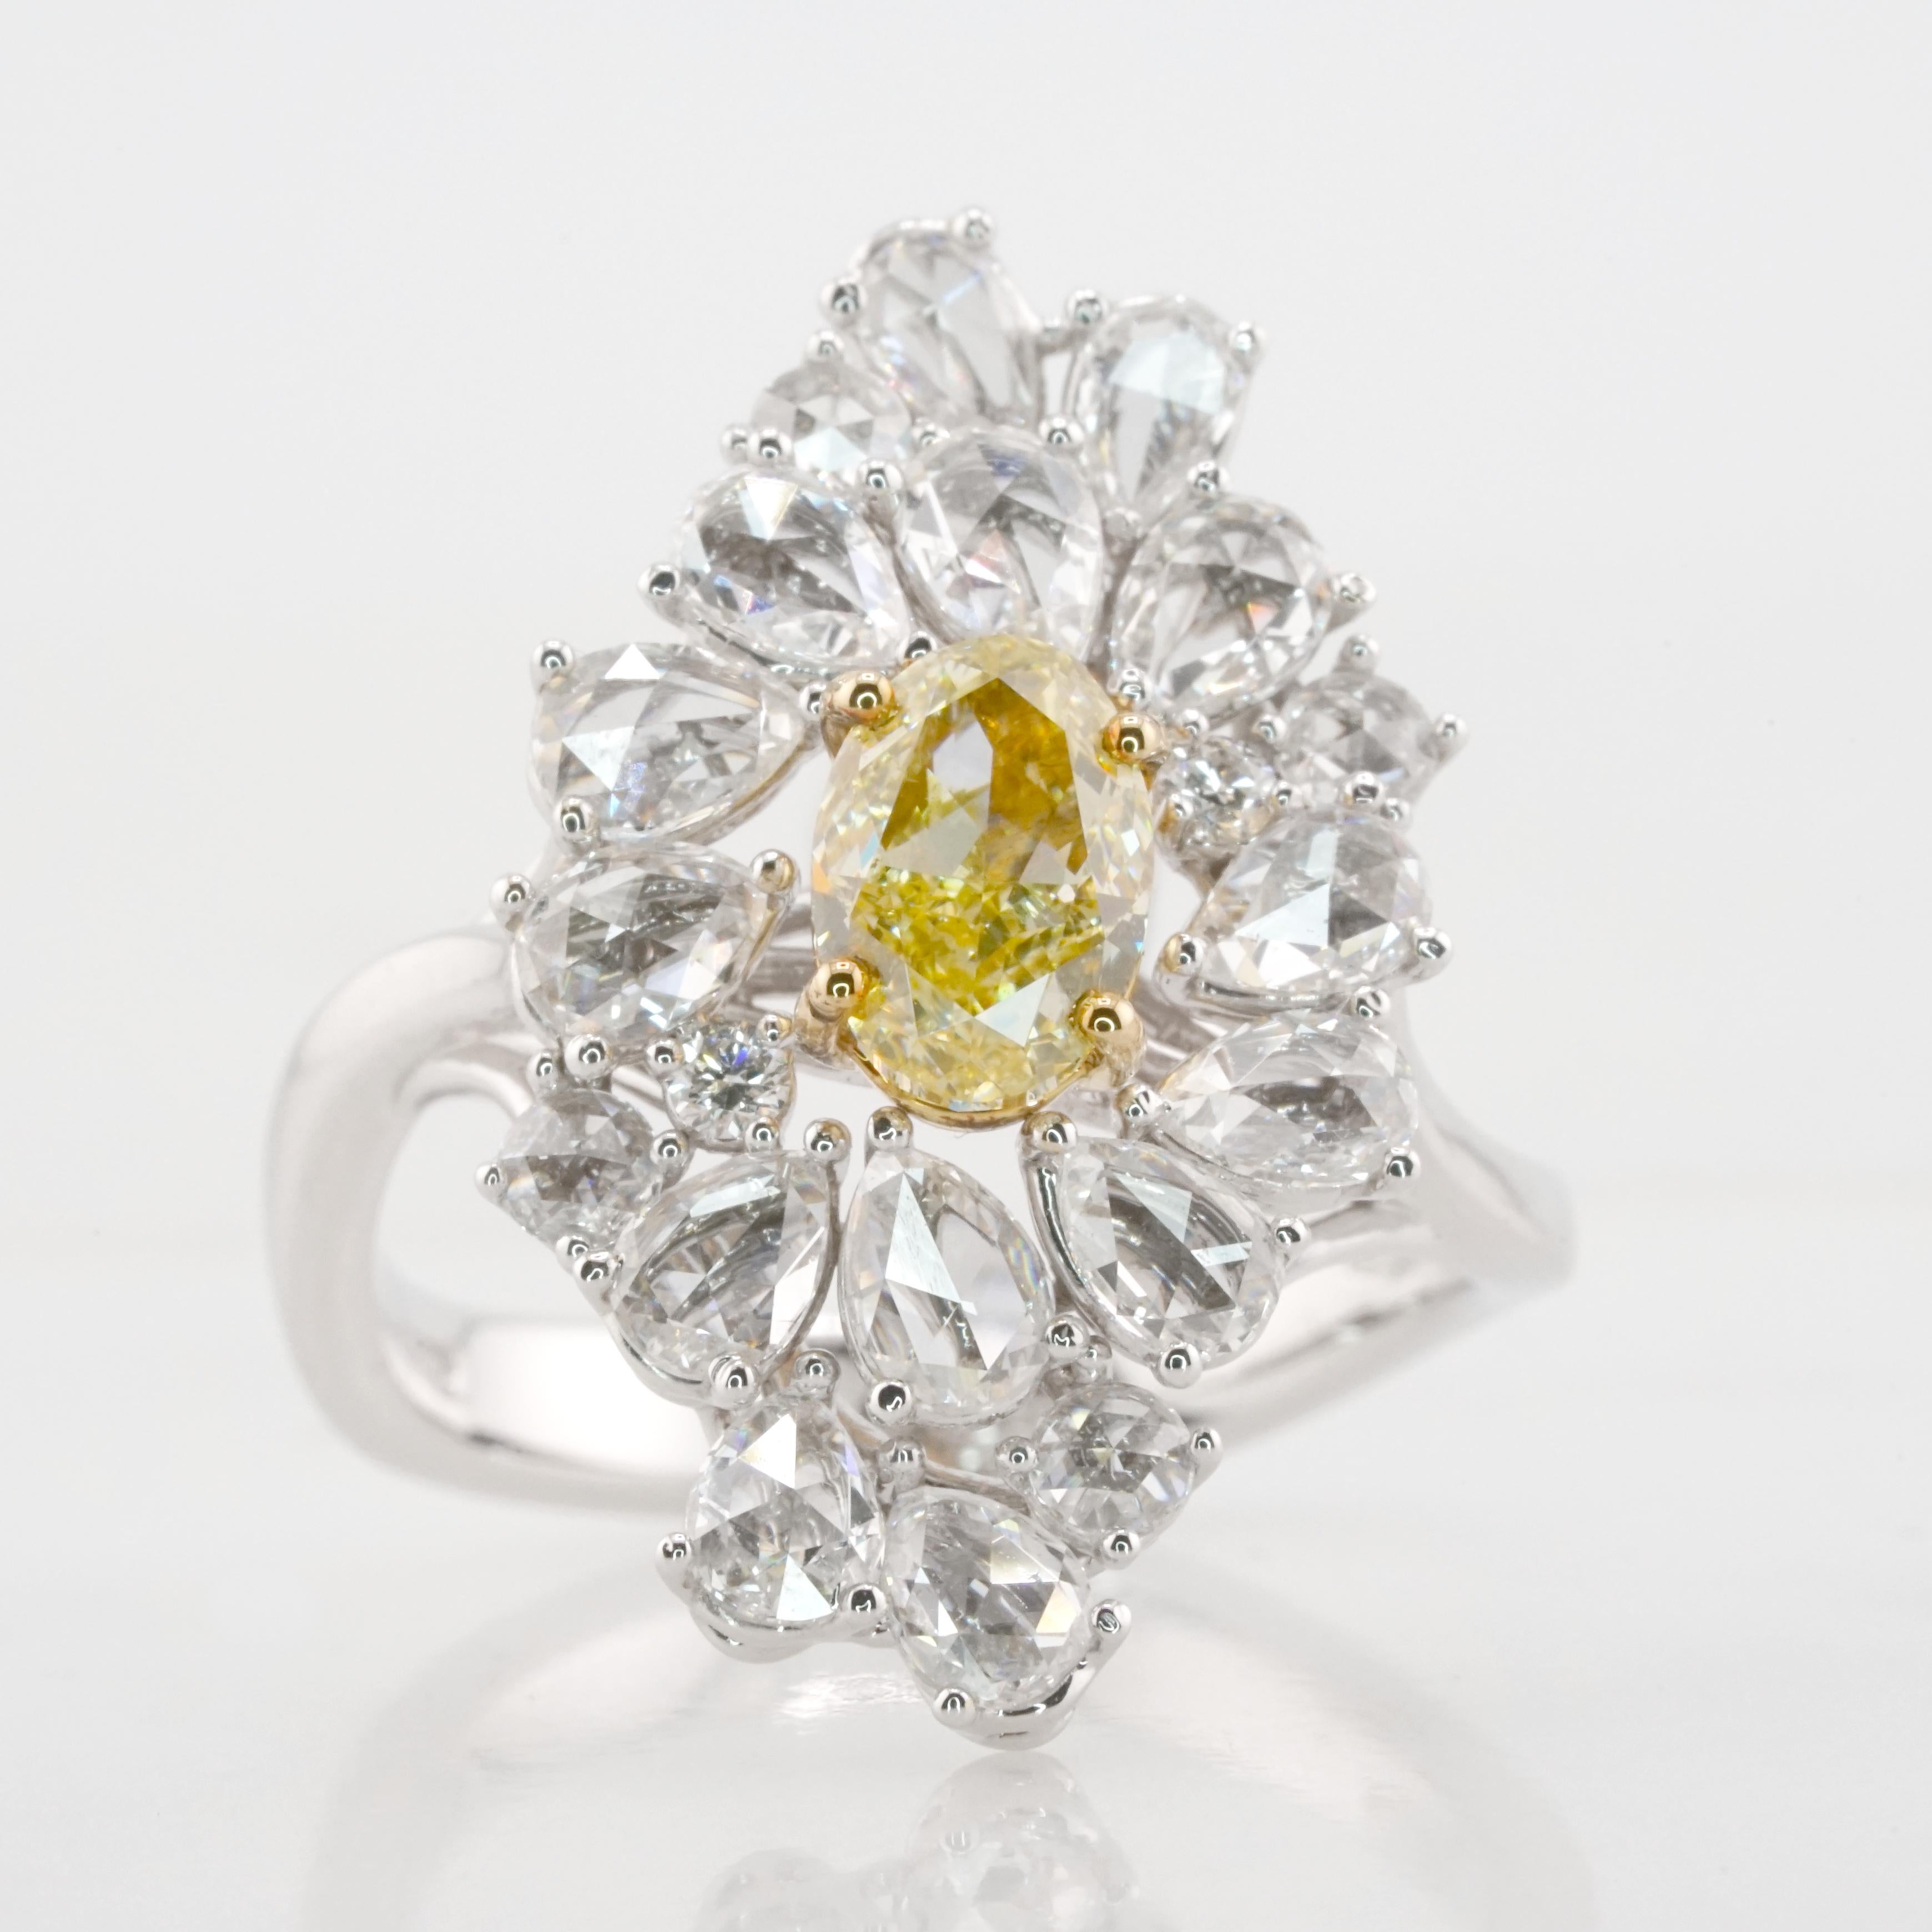 This amazing Antinori Di Sanpietro original creation features a 1.13 carat oval natural fancy yellow diamond.
The main stone is certified by GIA, the most important gemological laboratory for diamonds, being a fancy yellow is full of color and has